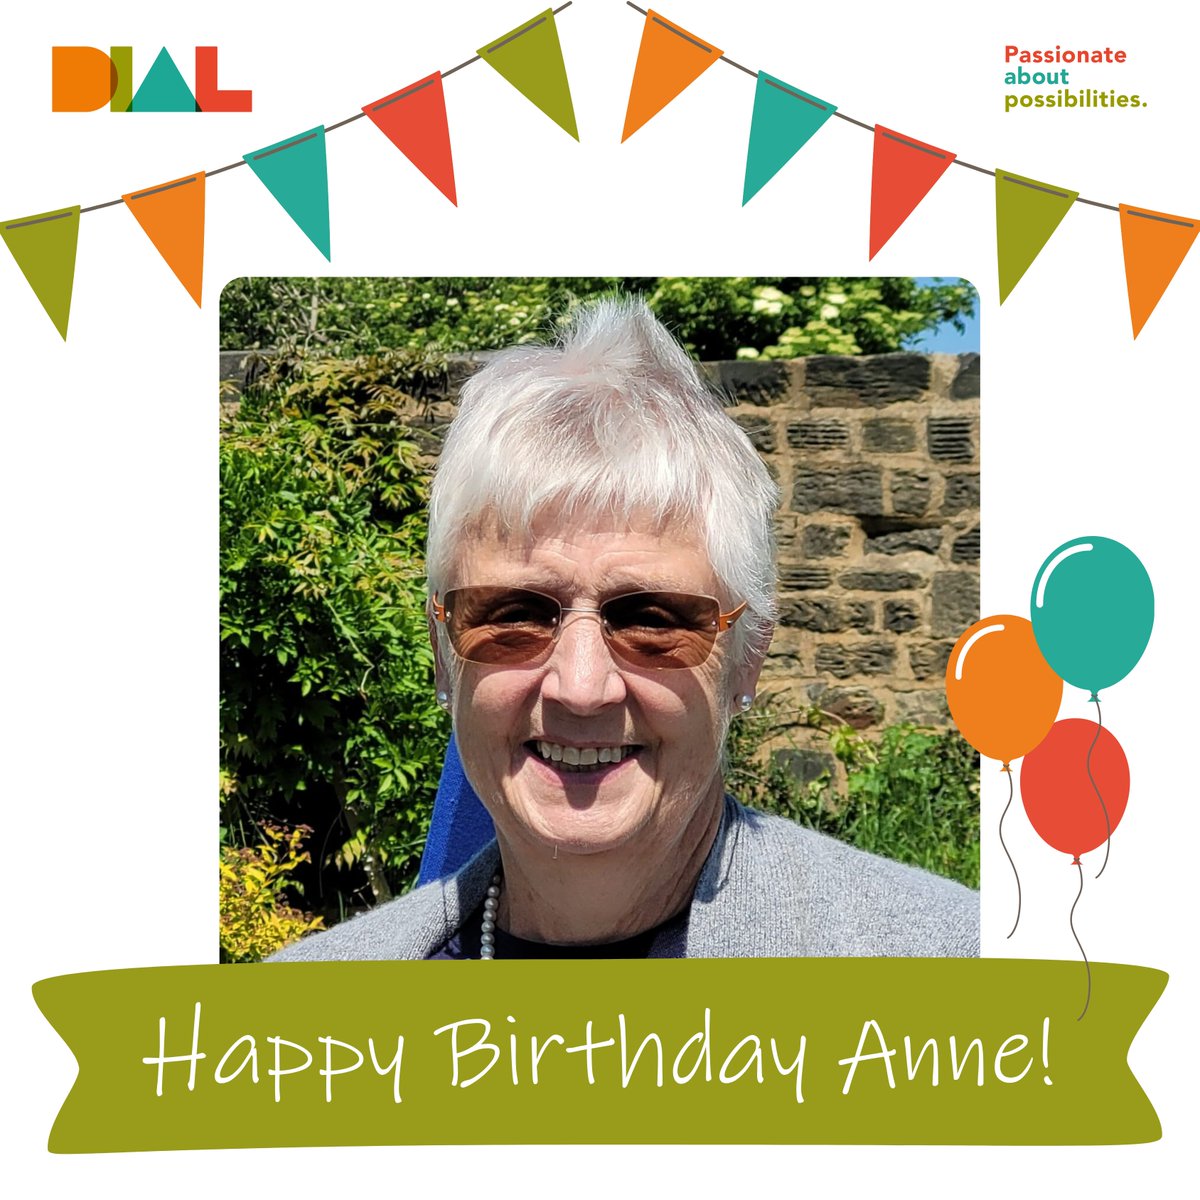 Happy Birthday to our wonderful Volunteer and Trustee, Anne! We hope that you have a lovely day 🎈 #PassionateAboutPossibilities #HappyBirthday #TeamDIAL